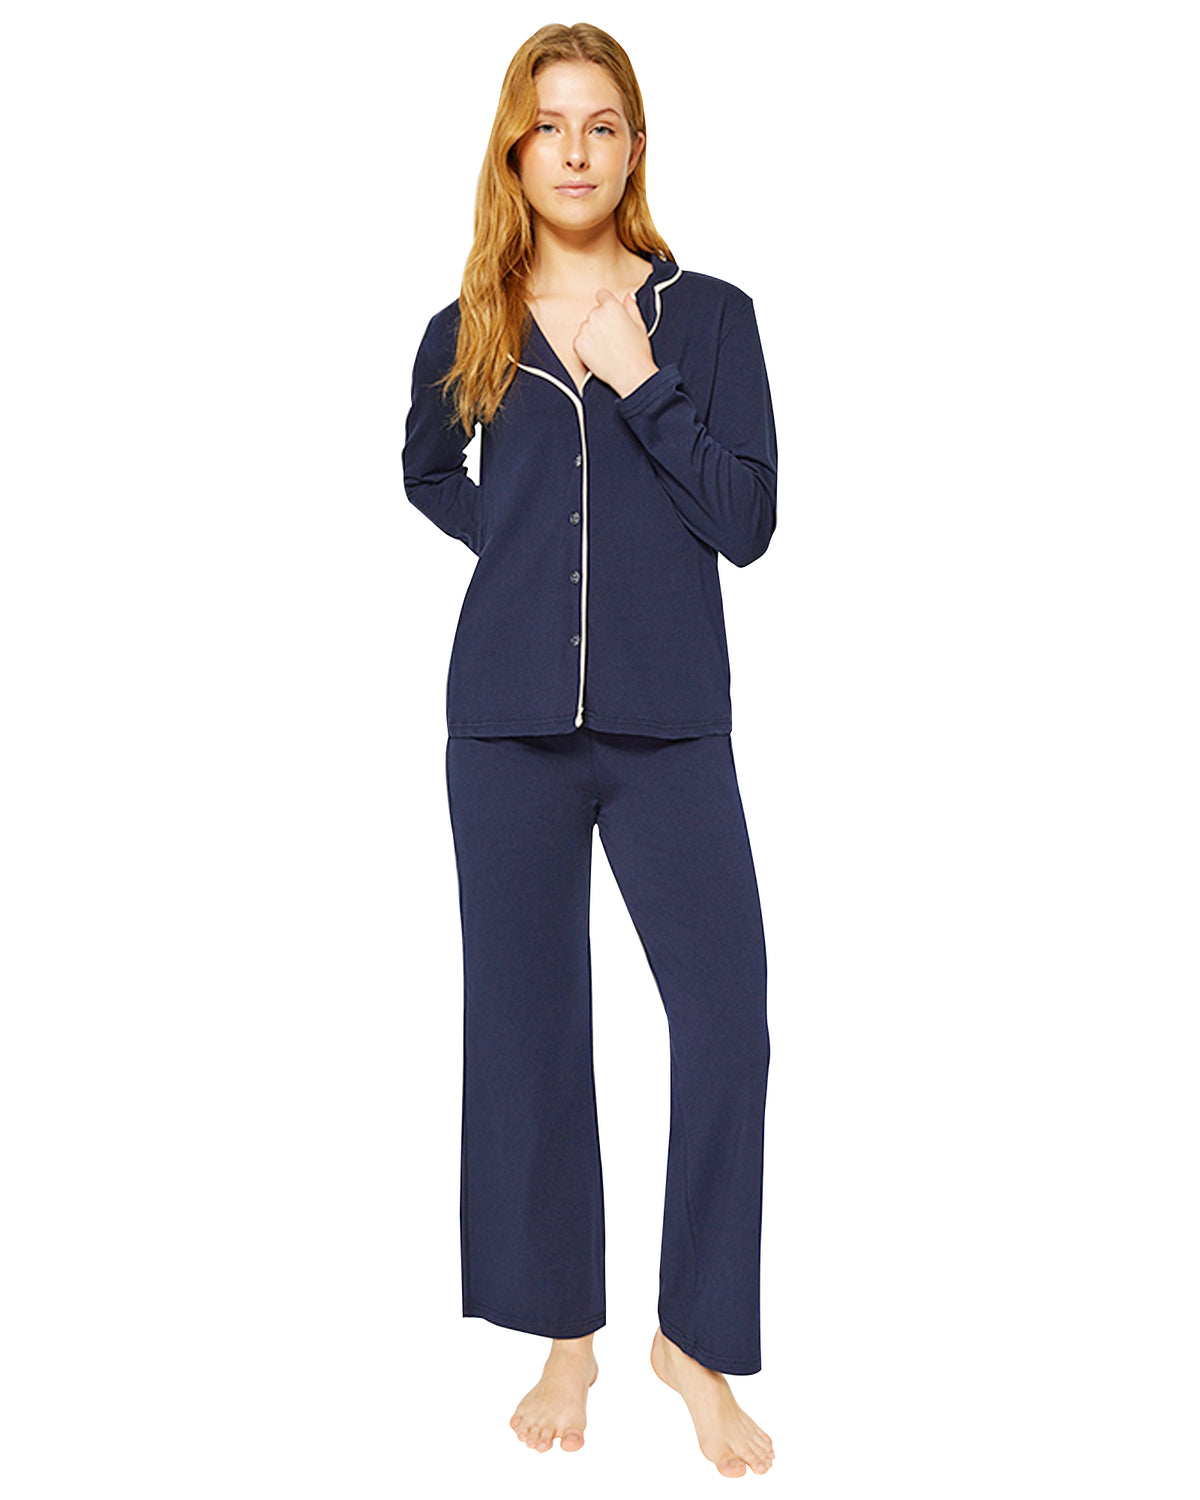 Women's Solid Full Length Pajama Set 2 Pieces